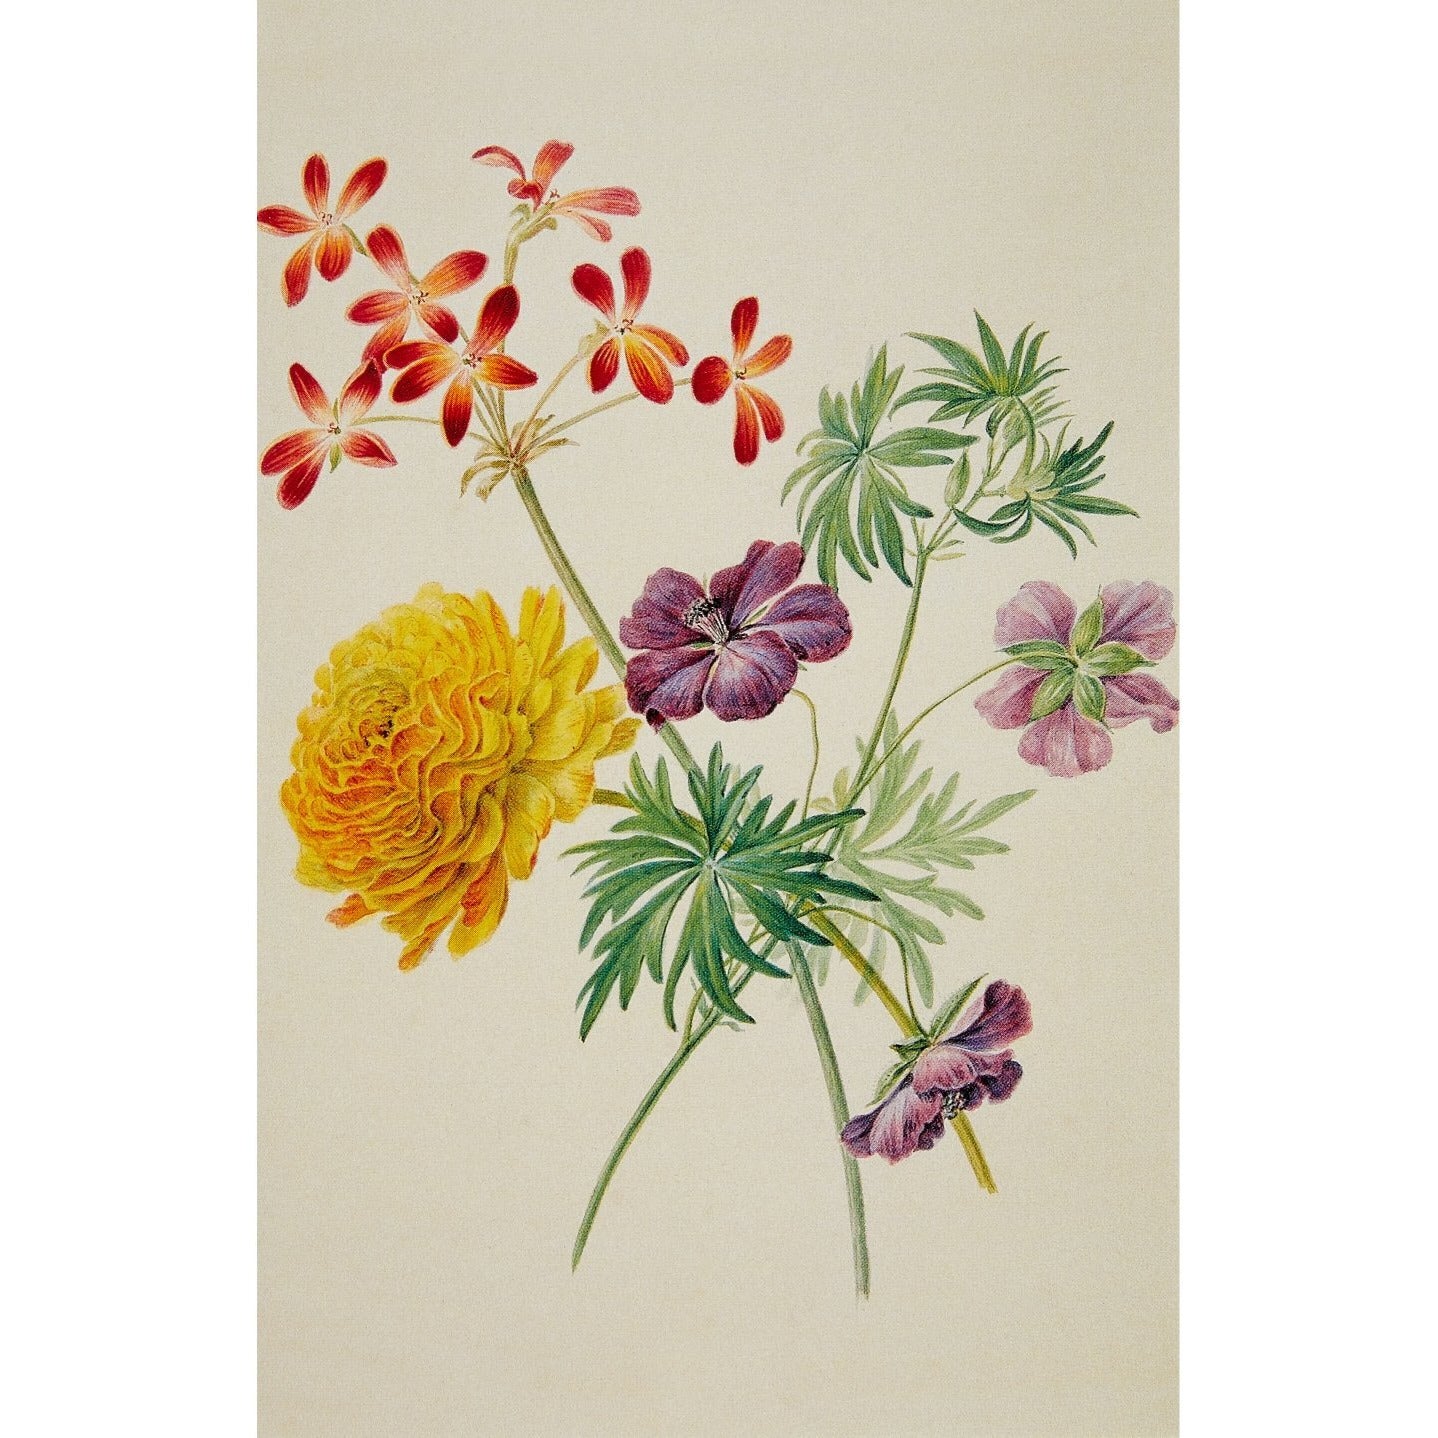 Notecard - Ranunculus, pelargonium and wild geranium by Henriette Geertruida Knip. From the Broughton collection of the Fitzwilliam Museum, brought to you by CuratingCambridge.co.uk